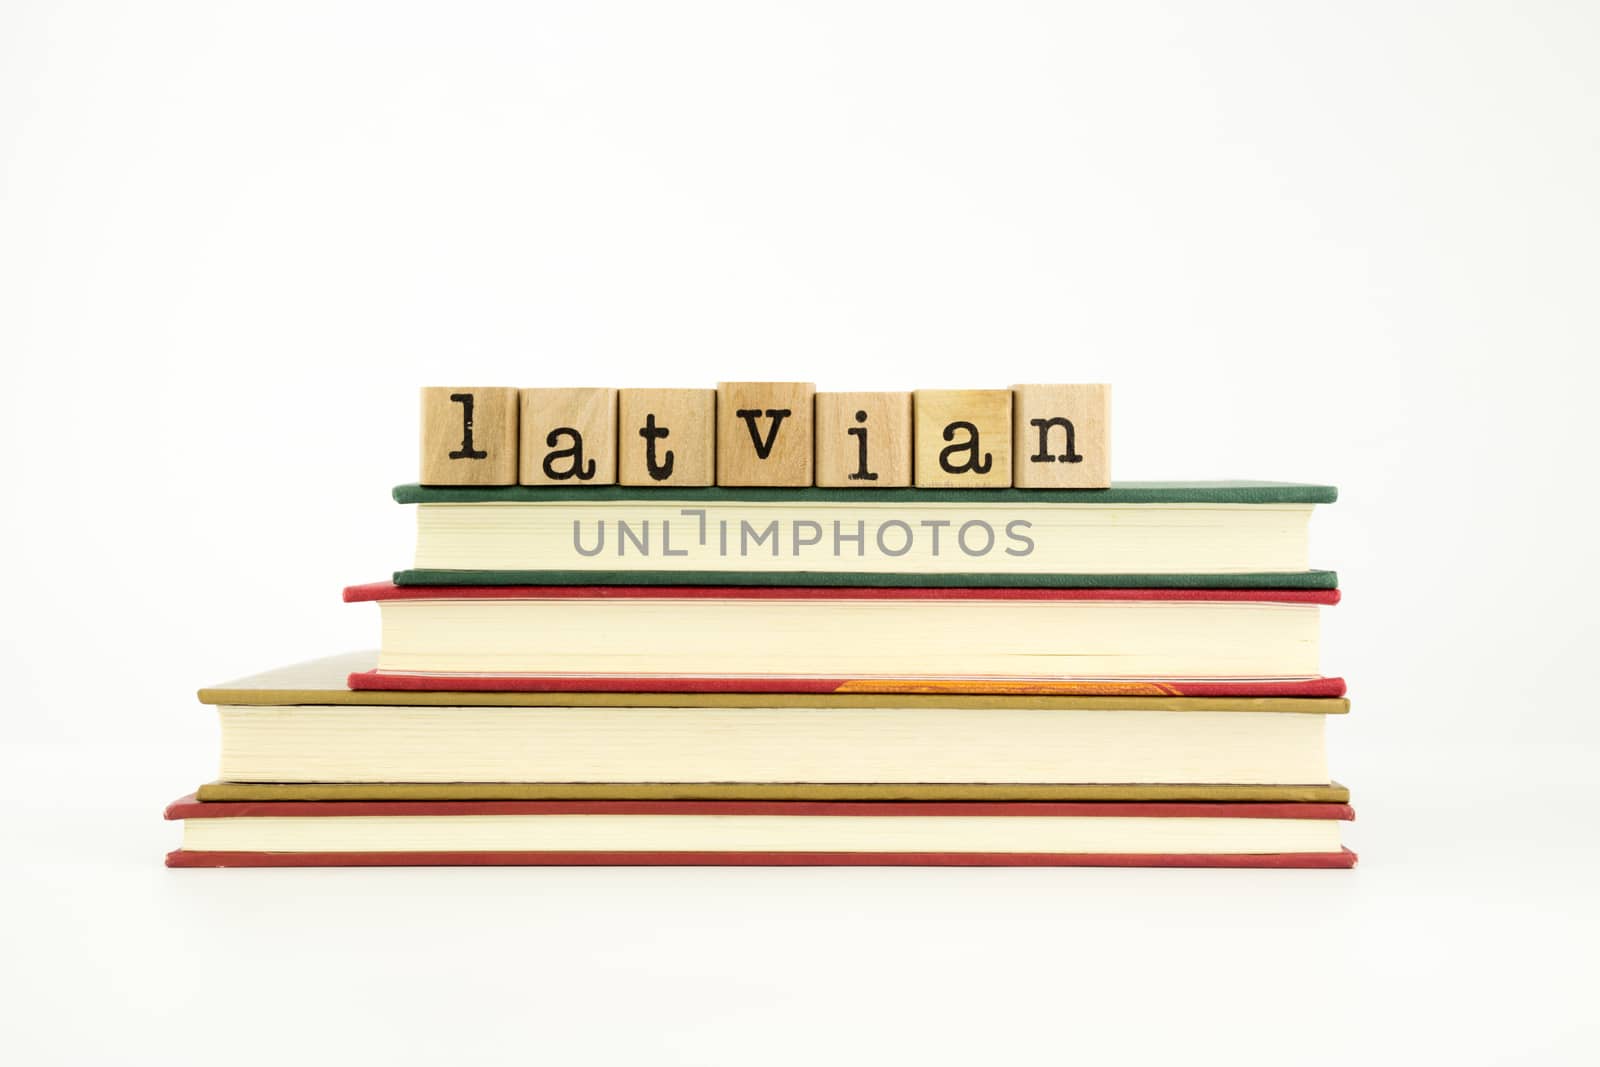 latvian language word on wood stamps and books by vinnstock